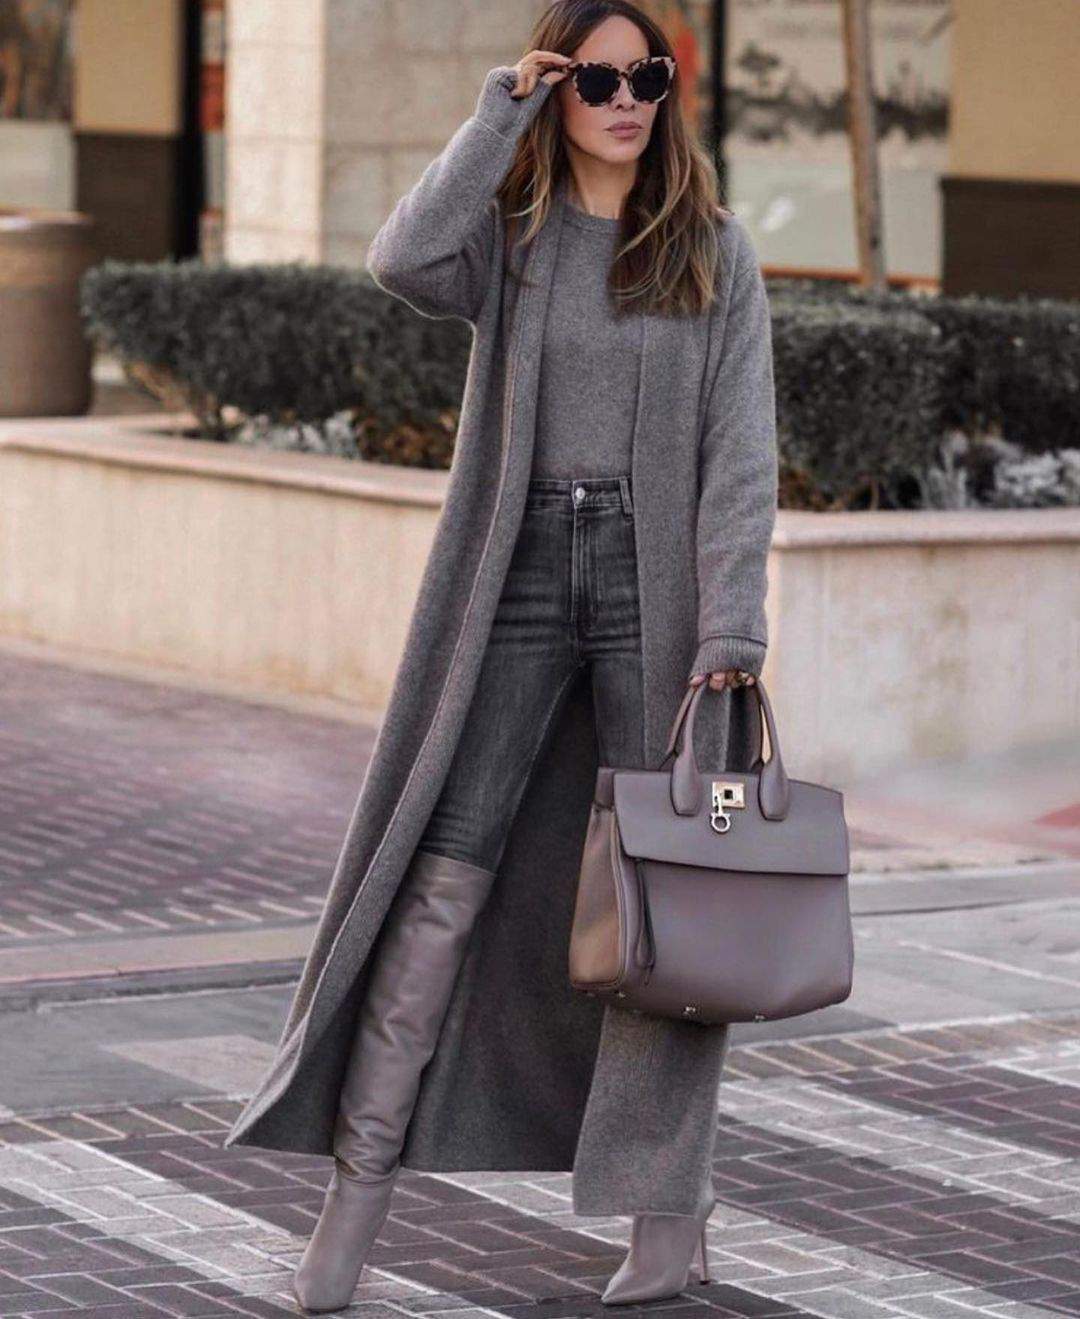 Fall Street Style Fashion For Women images 6